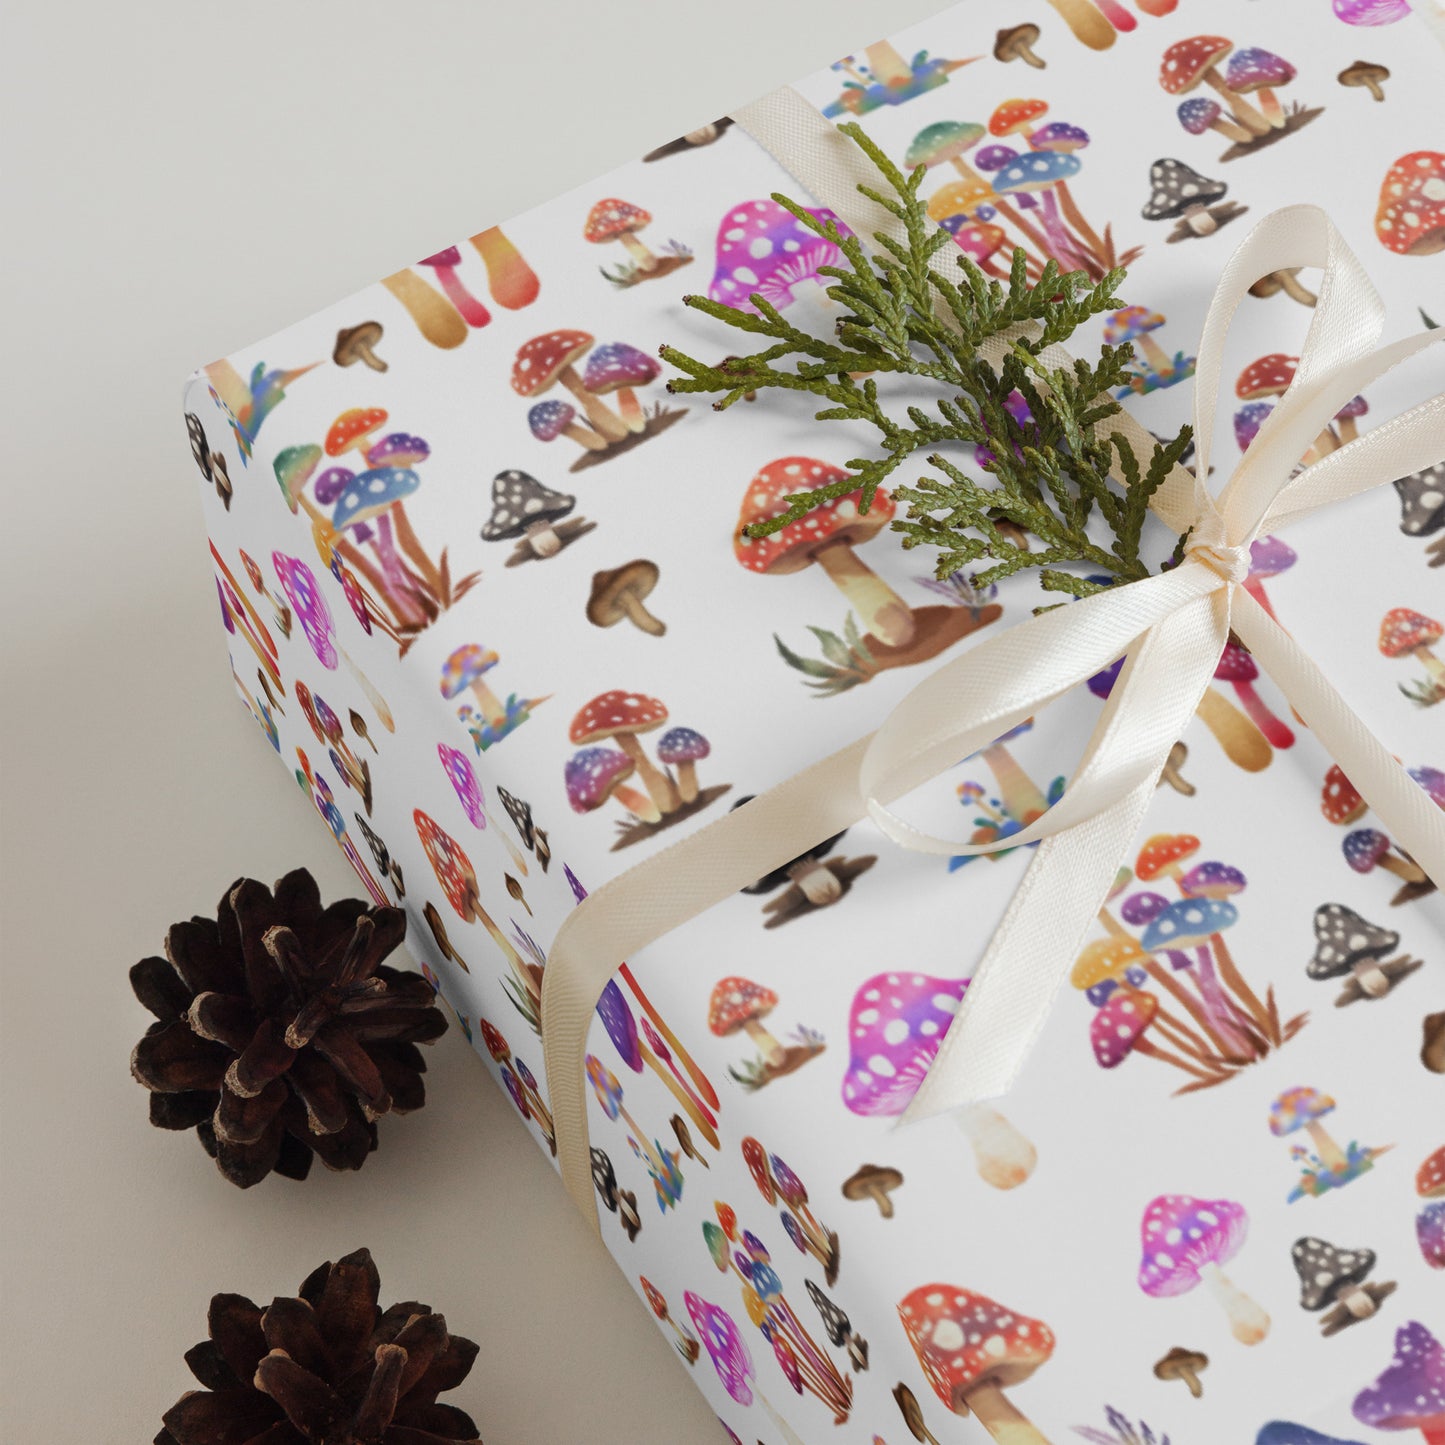 Fancy Mushrooms Wrapping paper sheets